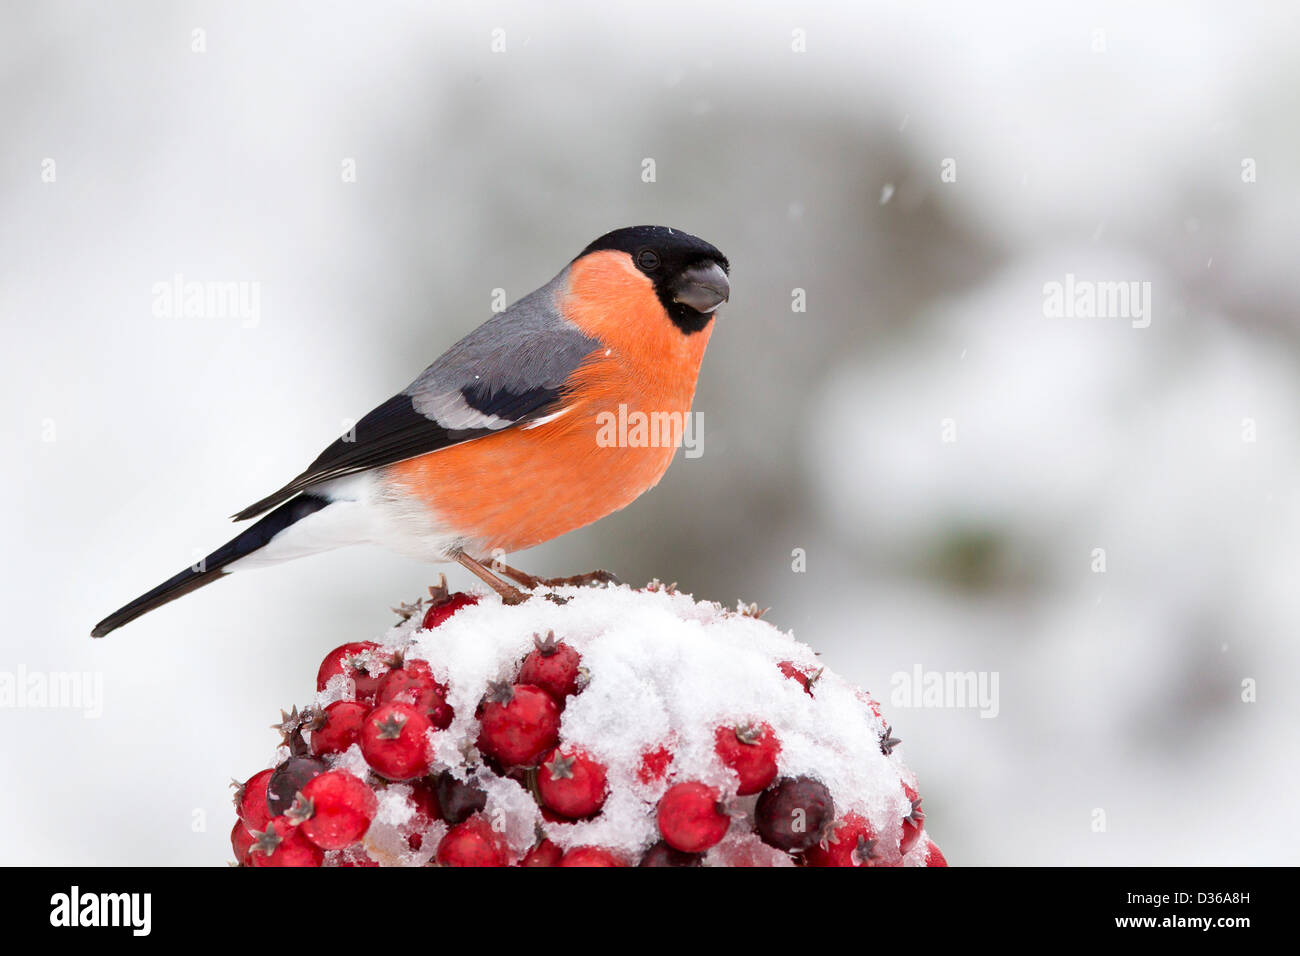 Male Bullfinch on red berries in the snow Stock Photo